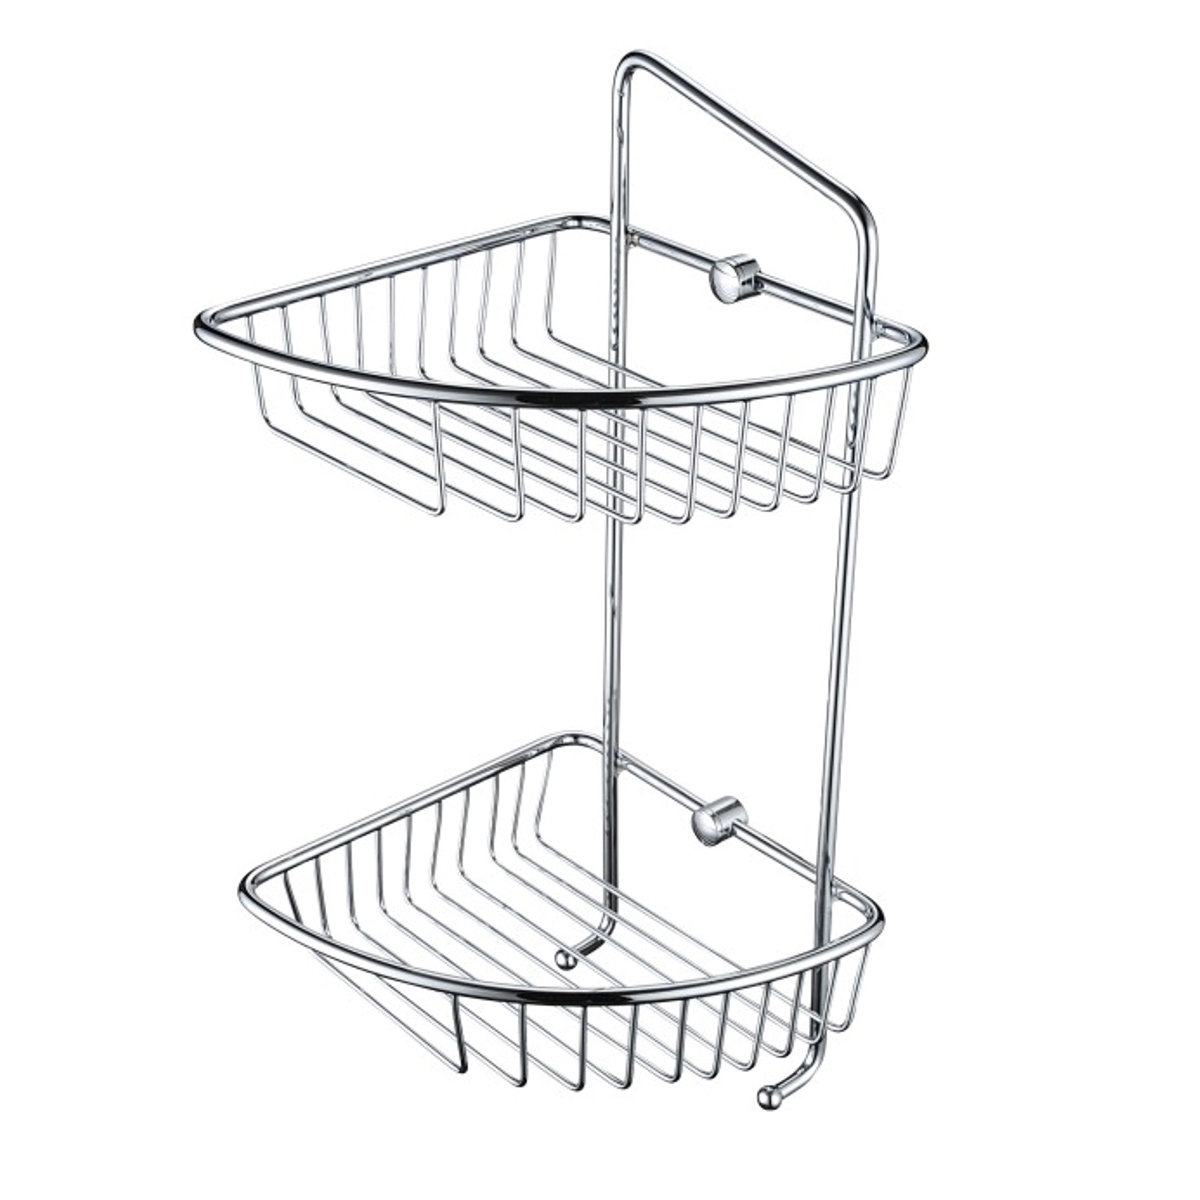 Bristan Wall Mounted Two Tier Fixed Wire Basket - Chrome - COMP BASK07 C 